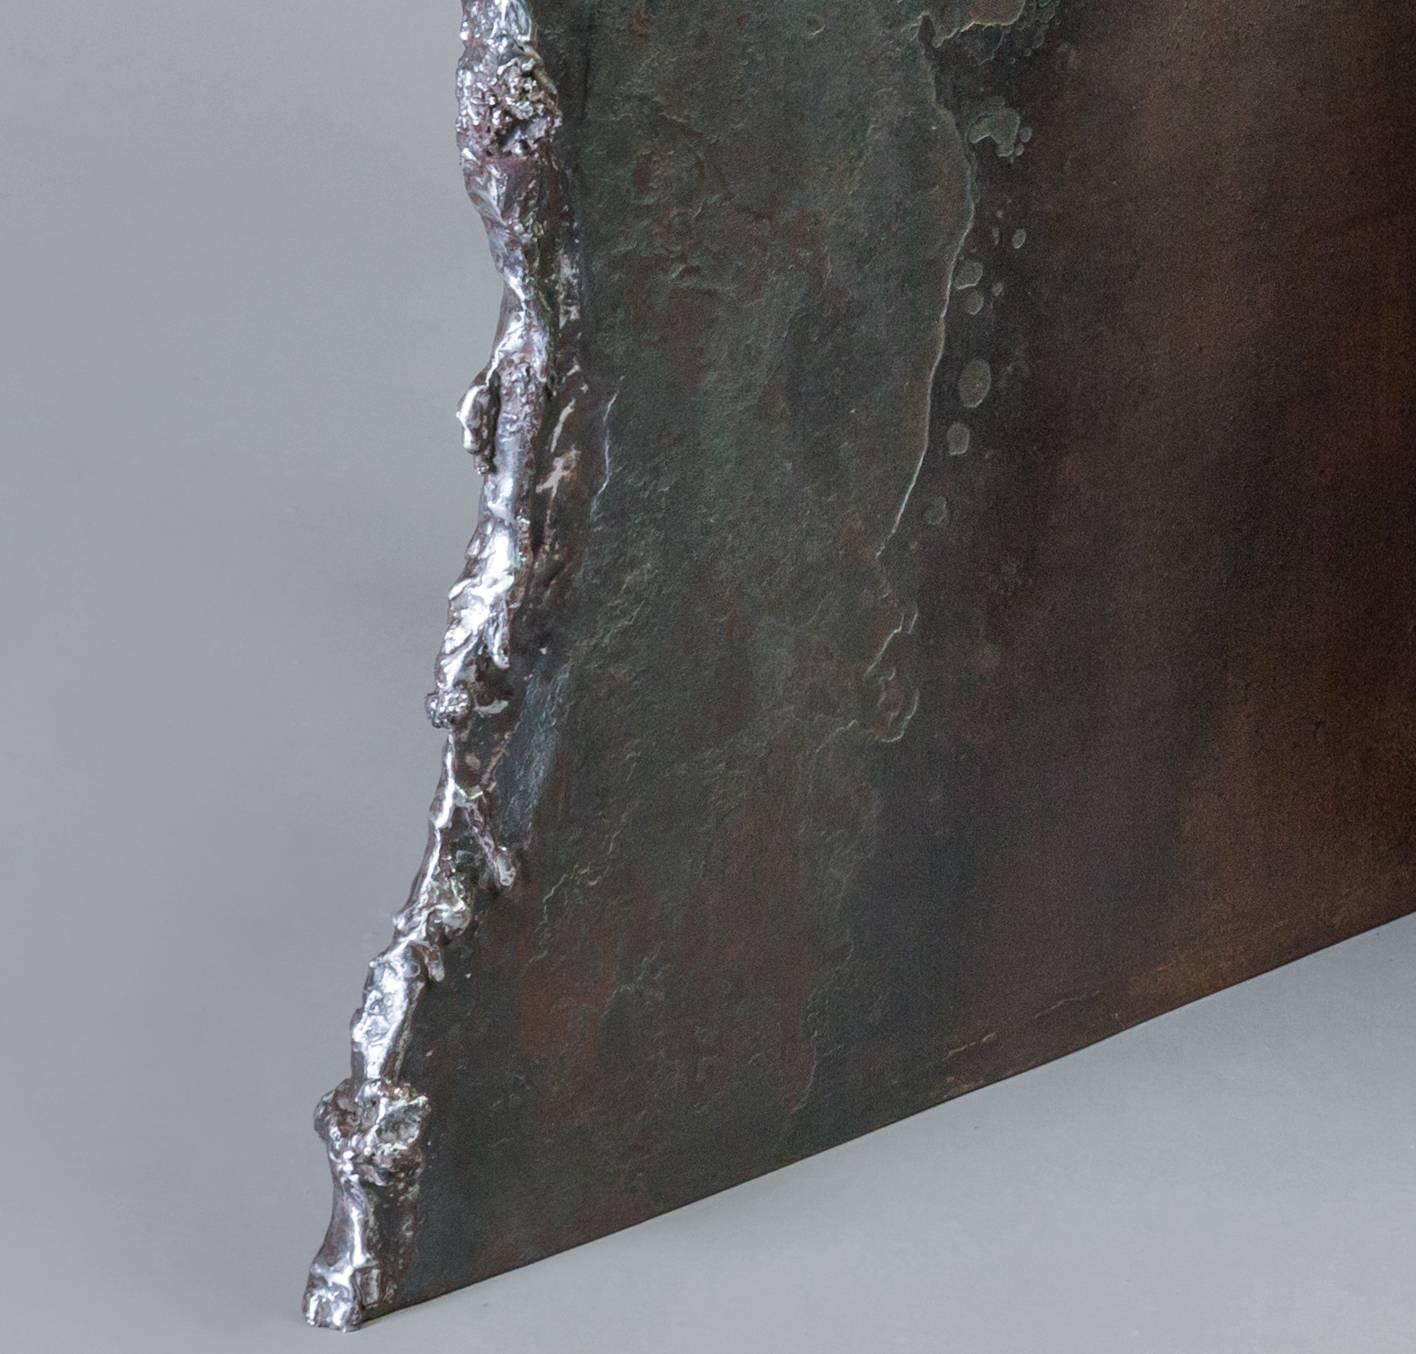 Contemporary / minimal bisecting steel plates. Melted edge steel base. 
One of a kind. ¾” thick steel. Japanese brown patina with oil and wax finish.

Dimensions: 17” H base: 24” x 36” glass top: 29” x 42” x ¾” thick.